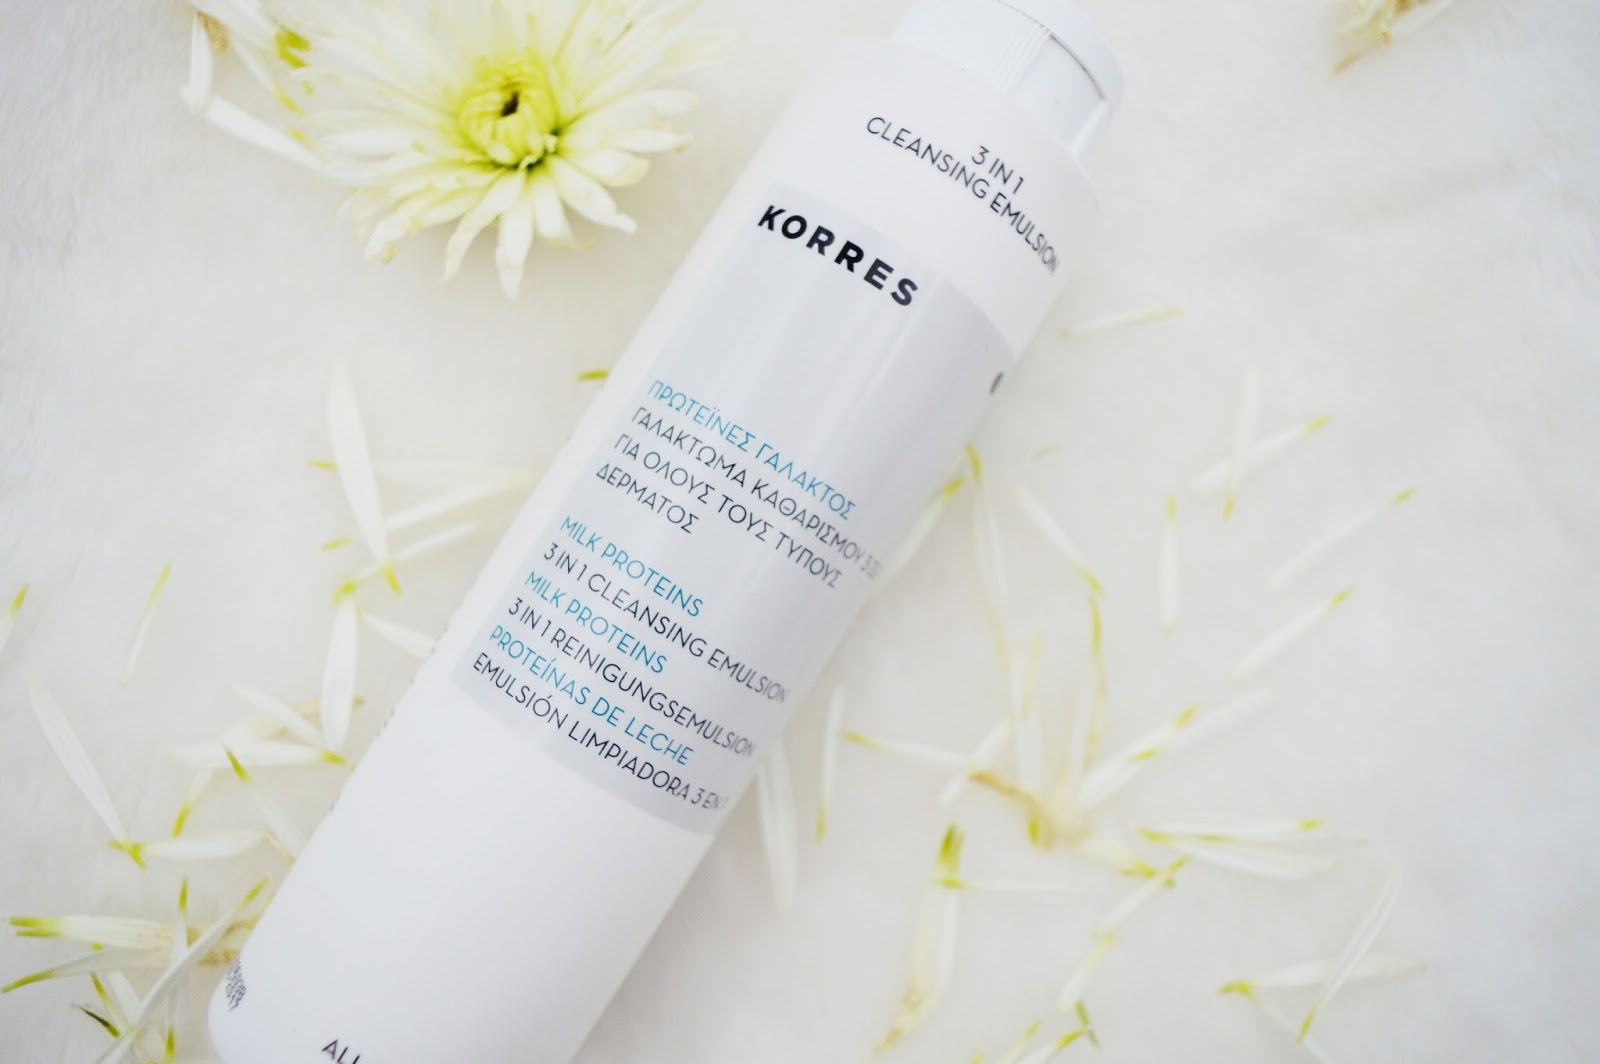 Korres 3 in 1 Cleansing Emulsion, FashionFake, beauty bloggers